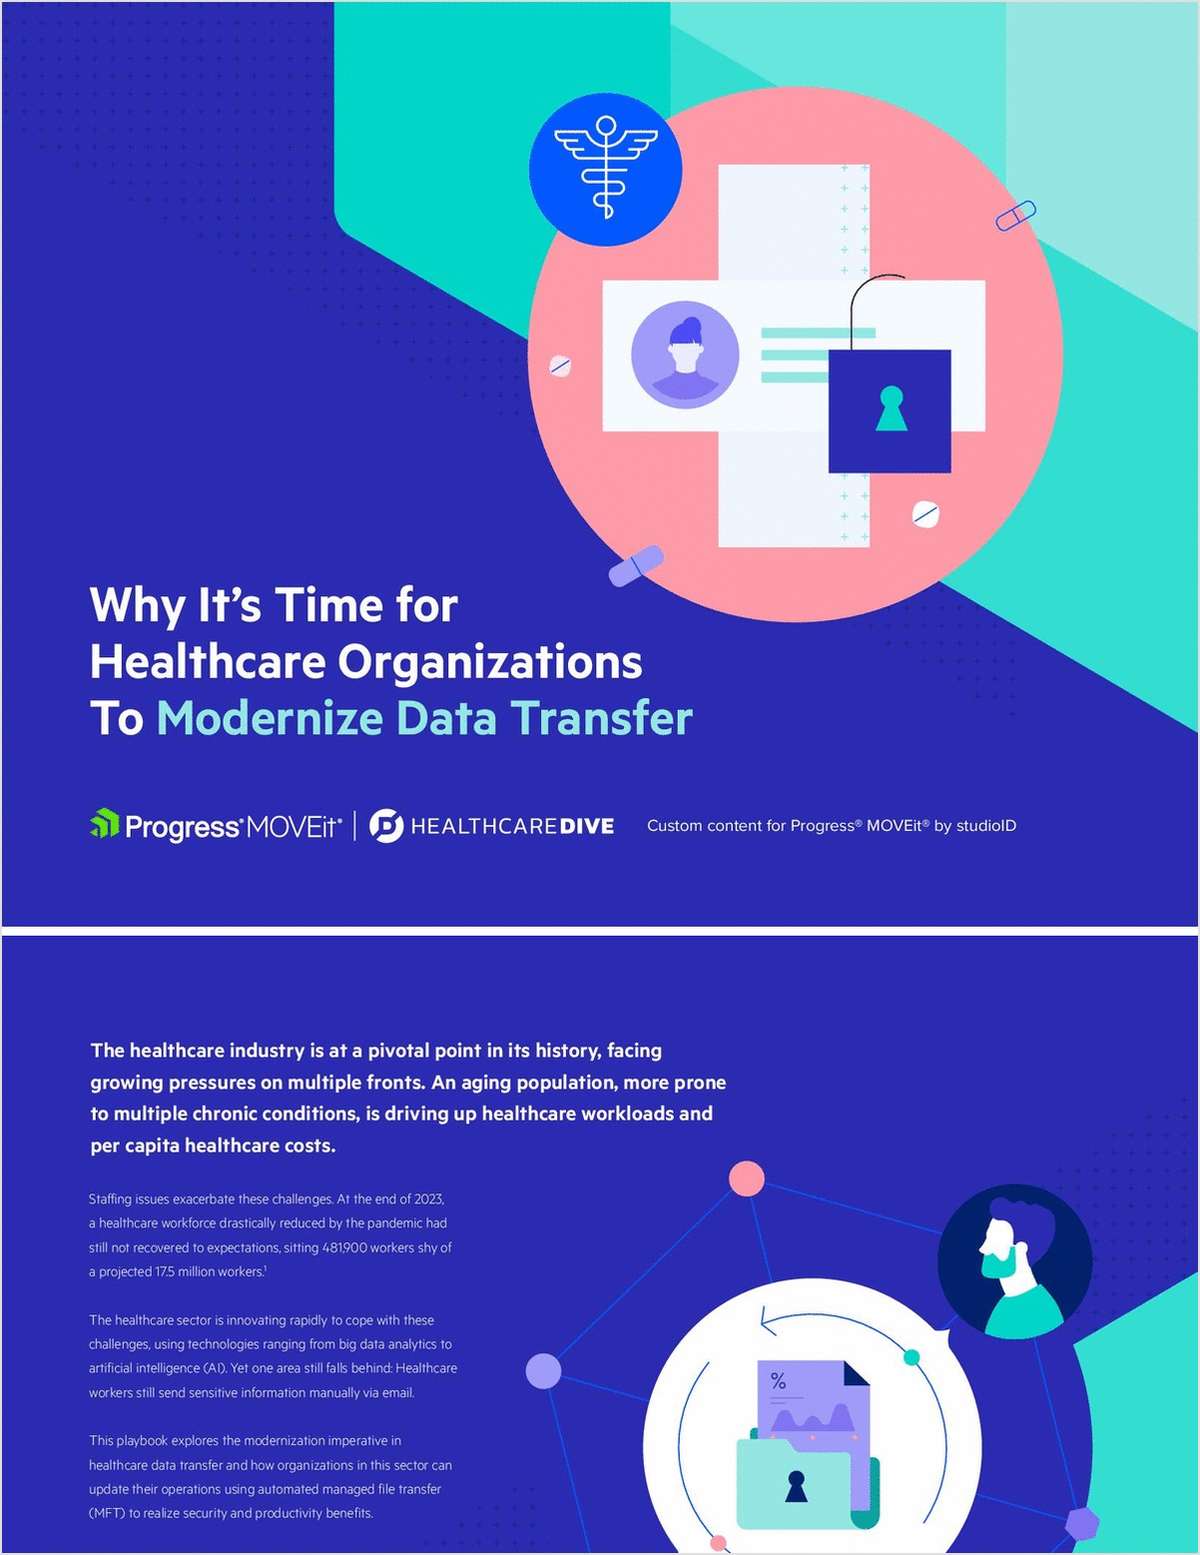 Why Healthcare Organizations are Modernizing Data Transfer